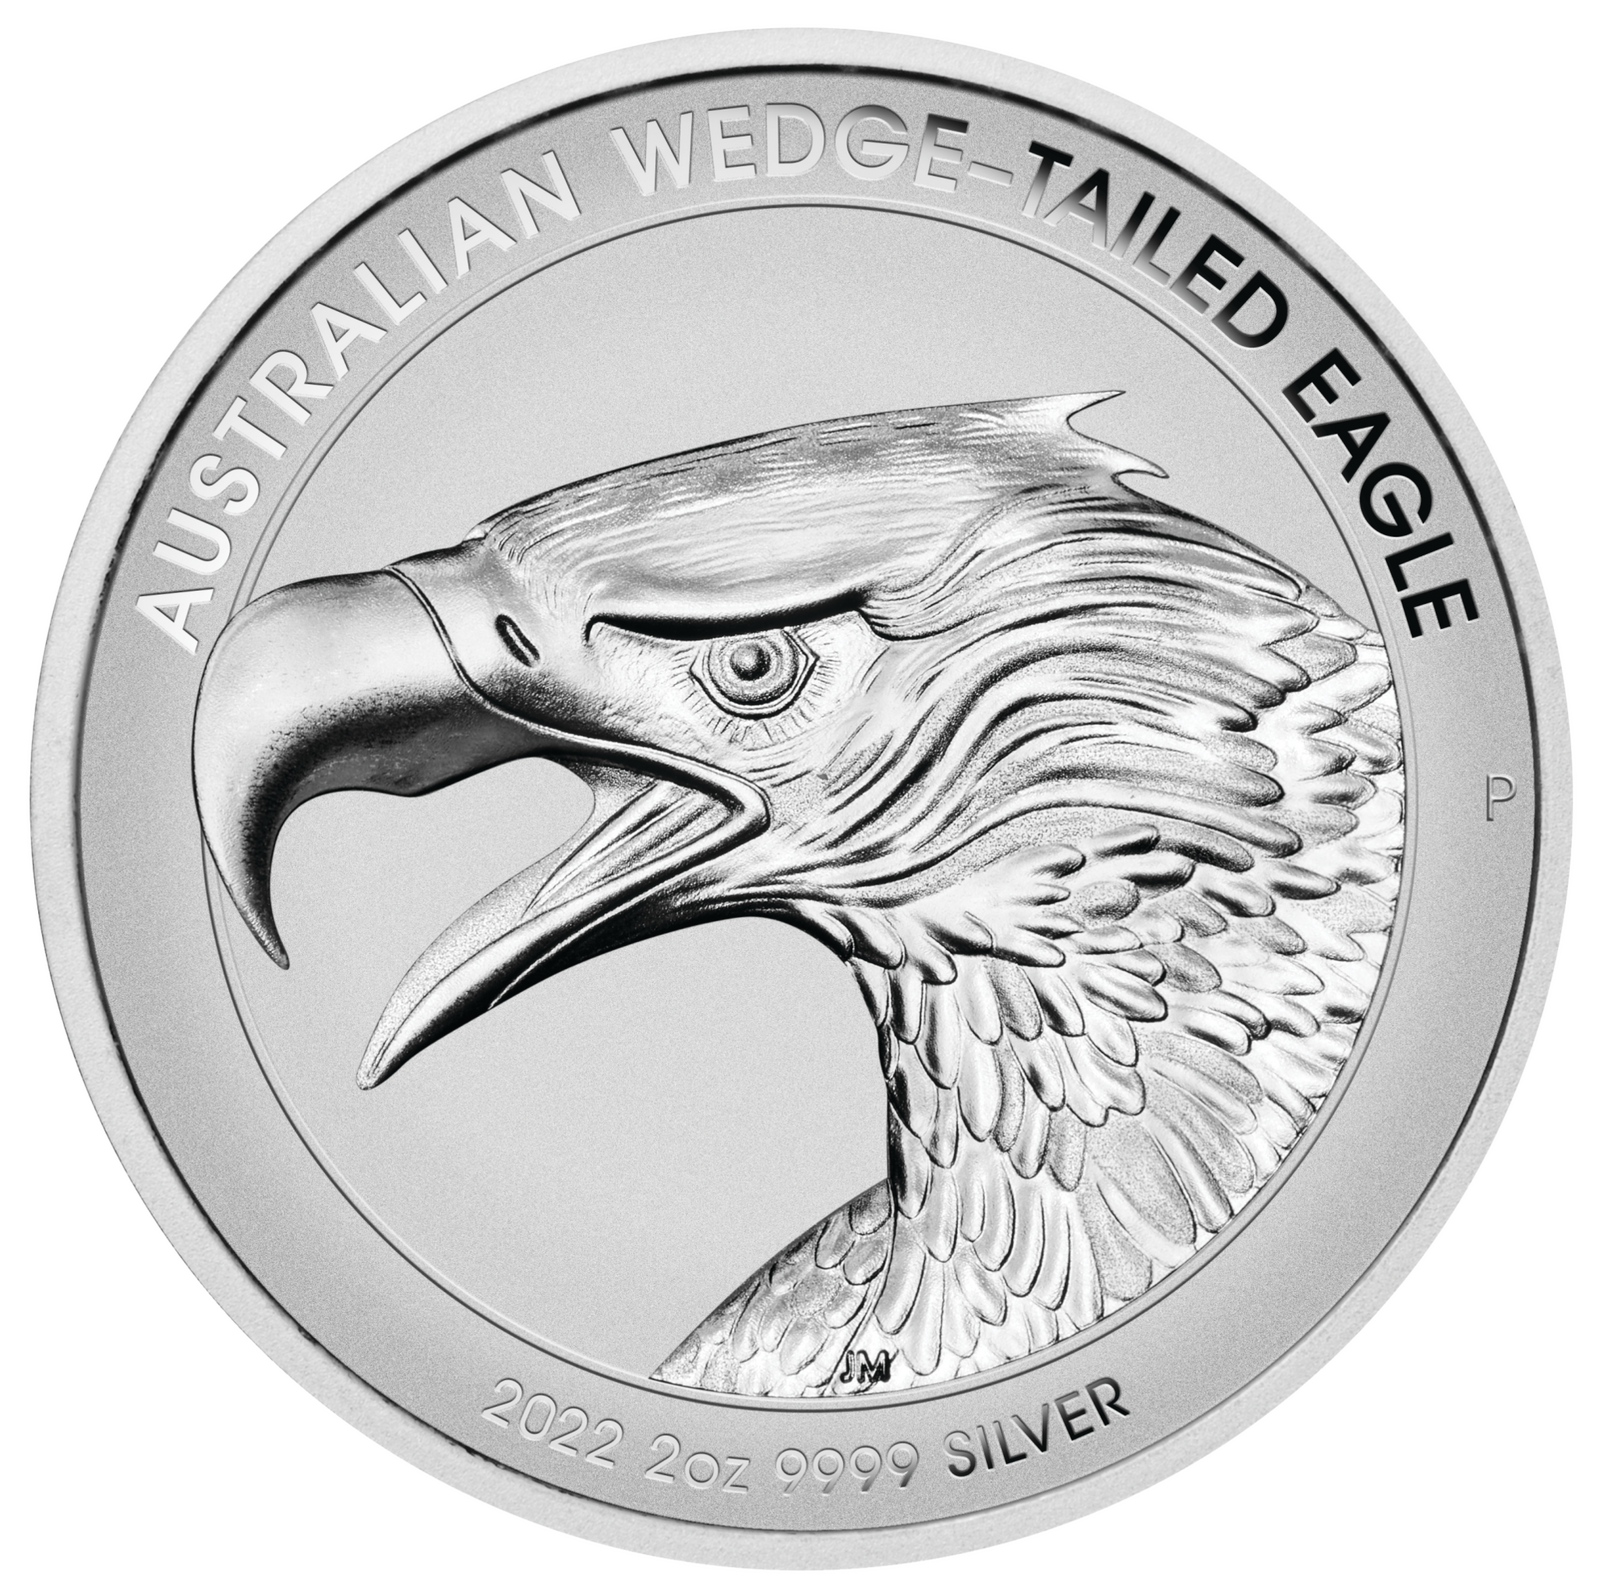 2022 $2 Wedge-Tailed Eagle 2oz Silver Enhanced Reverse High Relief Piedfort Proof Coin